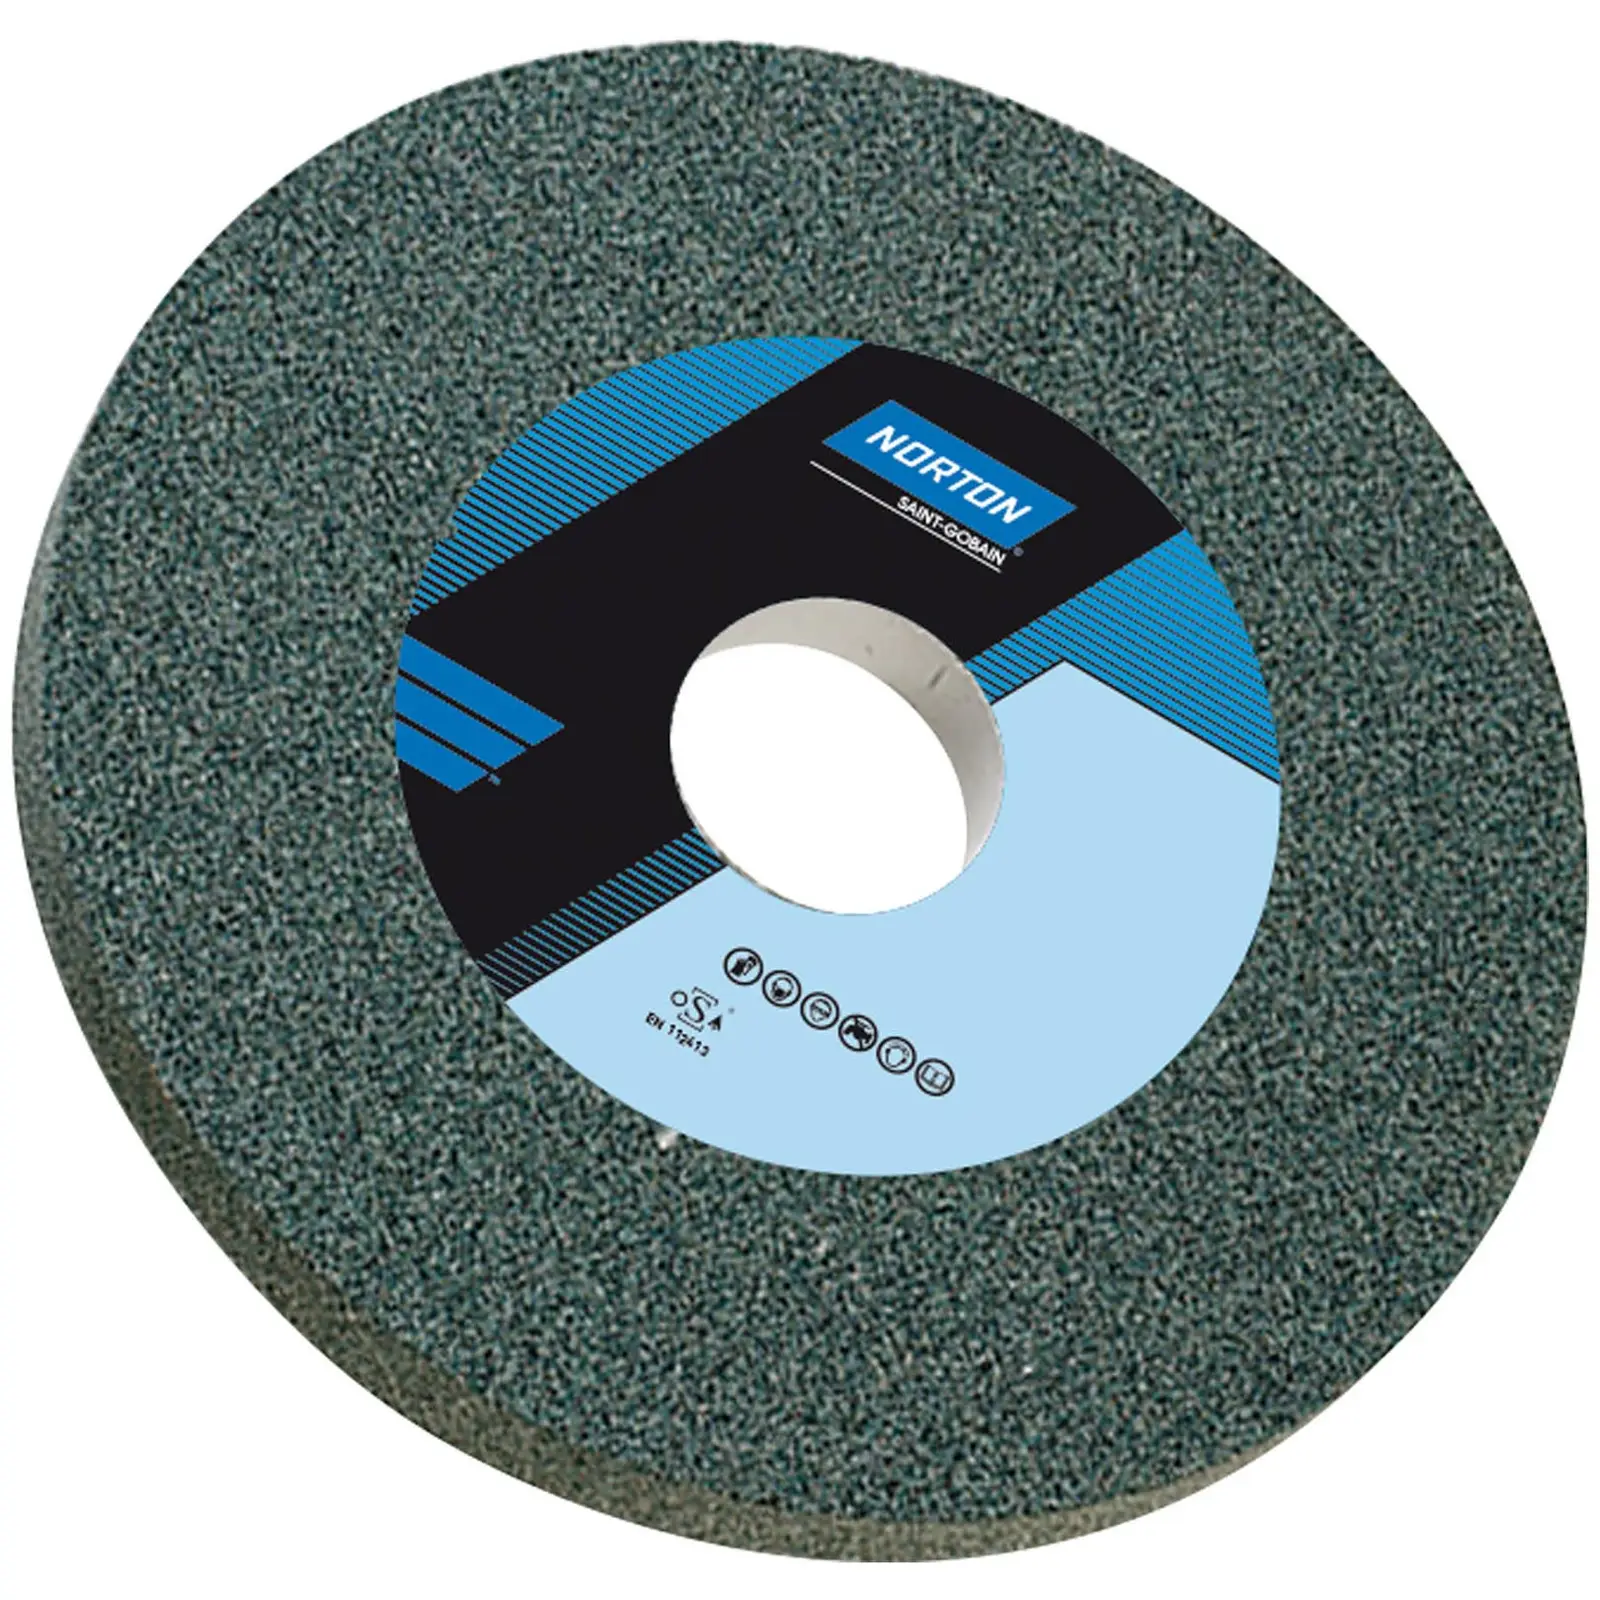 Grinding Wheel - Ø 200 mm - 60 grit - hardness grade K - silicon carbide (green) - 5 pieces